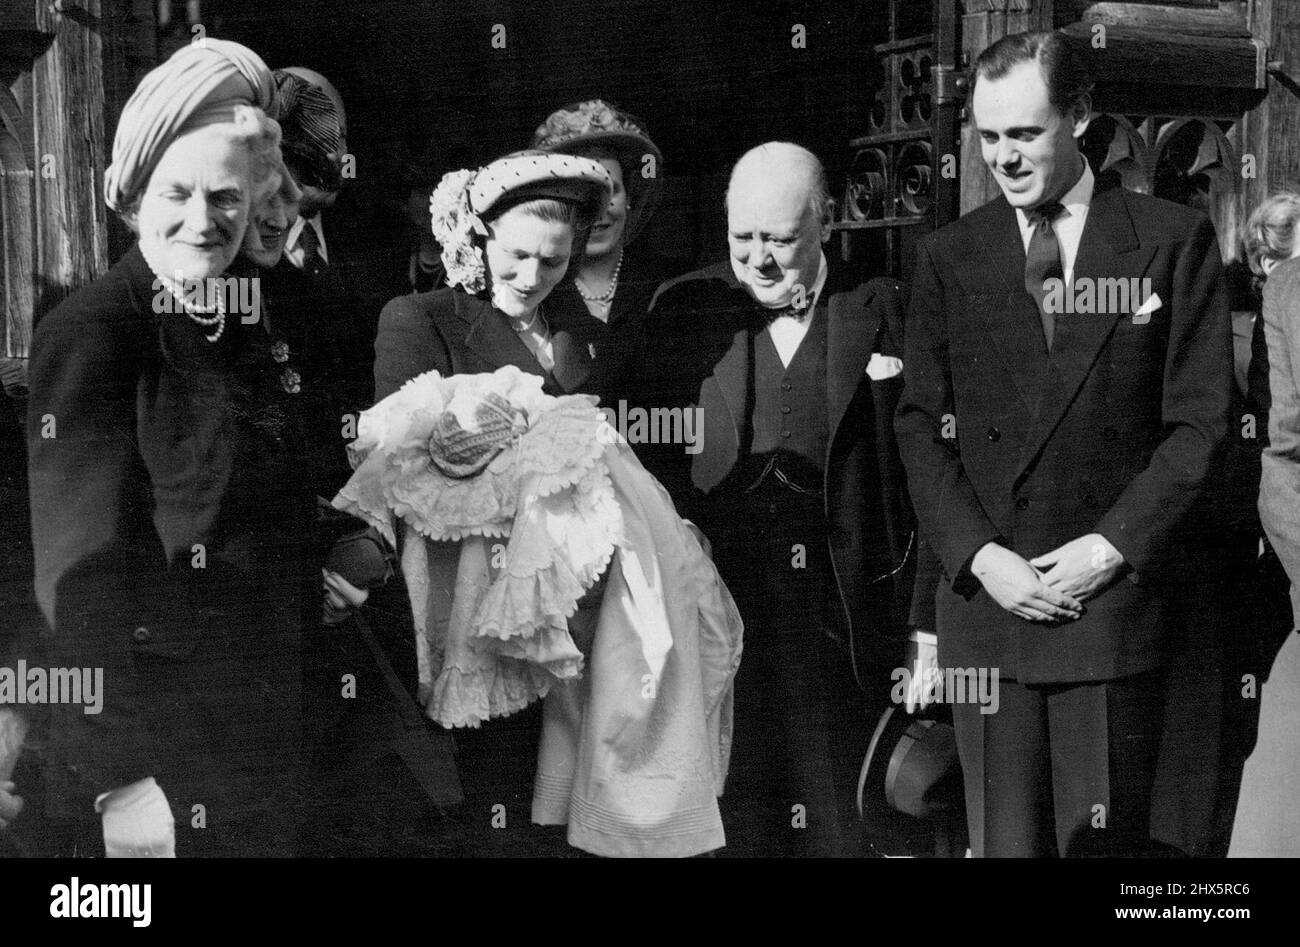 A Famous Grandfather -- Left to right: Mrs. Winston Churchill, Mrs. Soames with the baby, Mr. Winston Churchill, and Mr. Christopher Soames, leaving Westerham Church after the ceremony. The infant son of Mr. Christopher Soames and Mrs. Soames - formerly Miss Mary Churchill daughter of Mr. and Winston Churchill - was christened at Westerham (Kent) Parish Church. The baby was named Arthur Nicholas Winston. March 28, 1948. (Photo by Sport & General Press Agency, Limited). Stock Photo